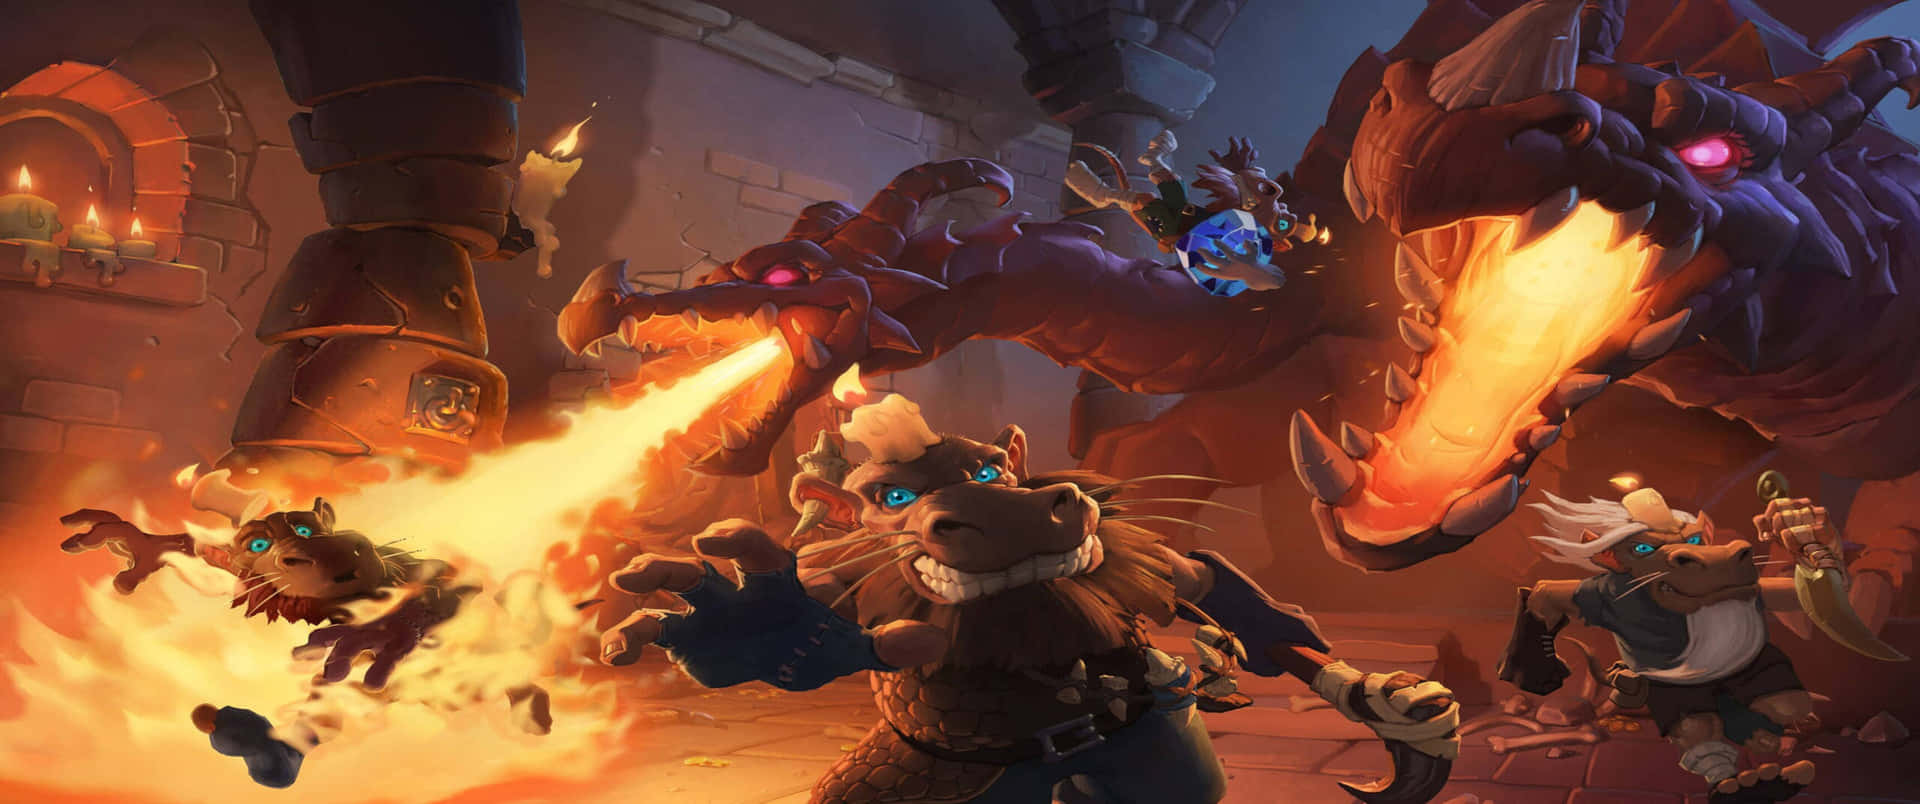 Enhance Your Hearthstone Gaming Experience with 3440x1440 Wallpaper